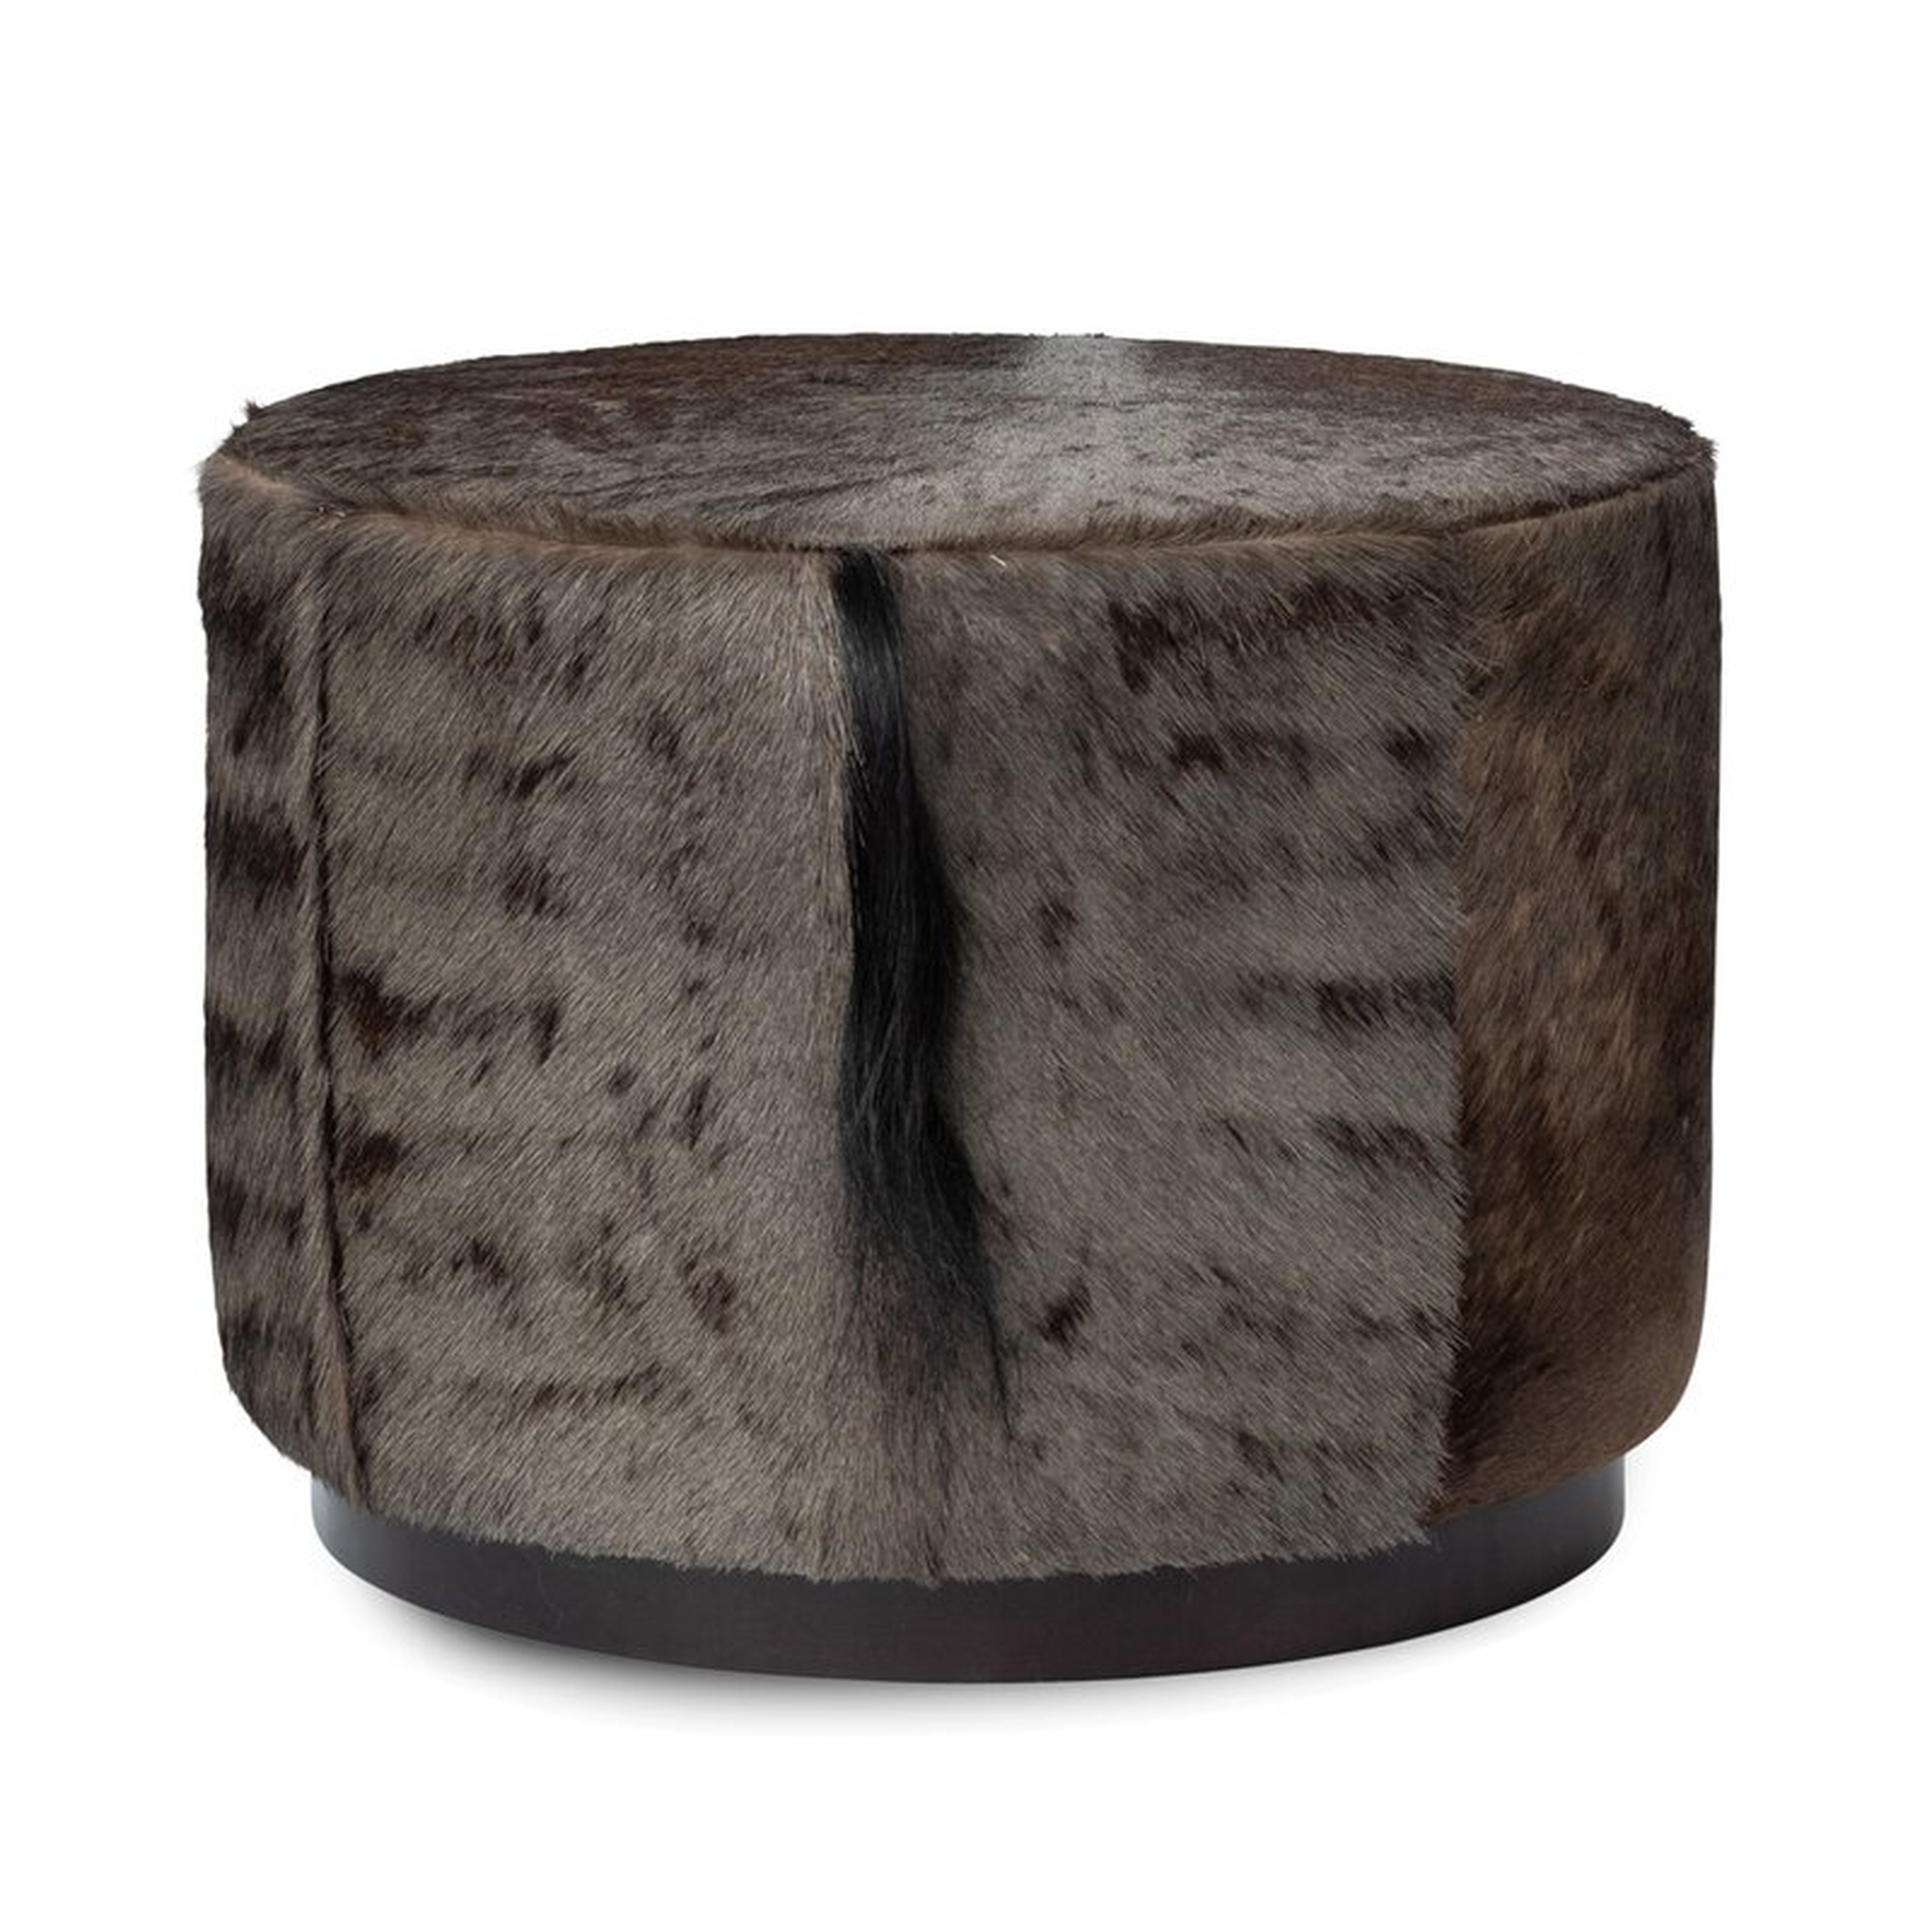 Ngala Trading Co. African Game Hide 18.5"" Wide Genuine Leather Round Cube Ottoman - Perigold